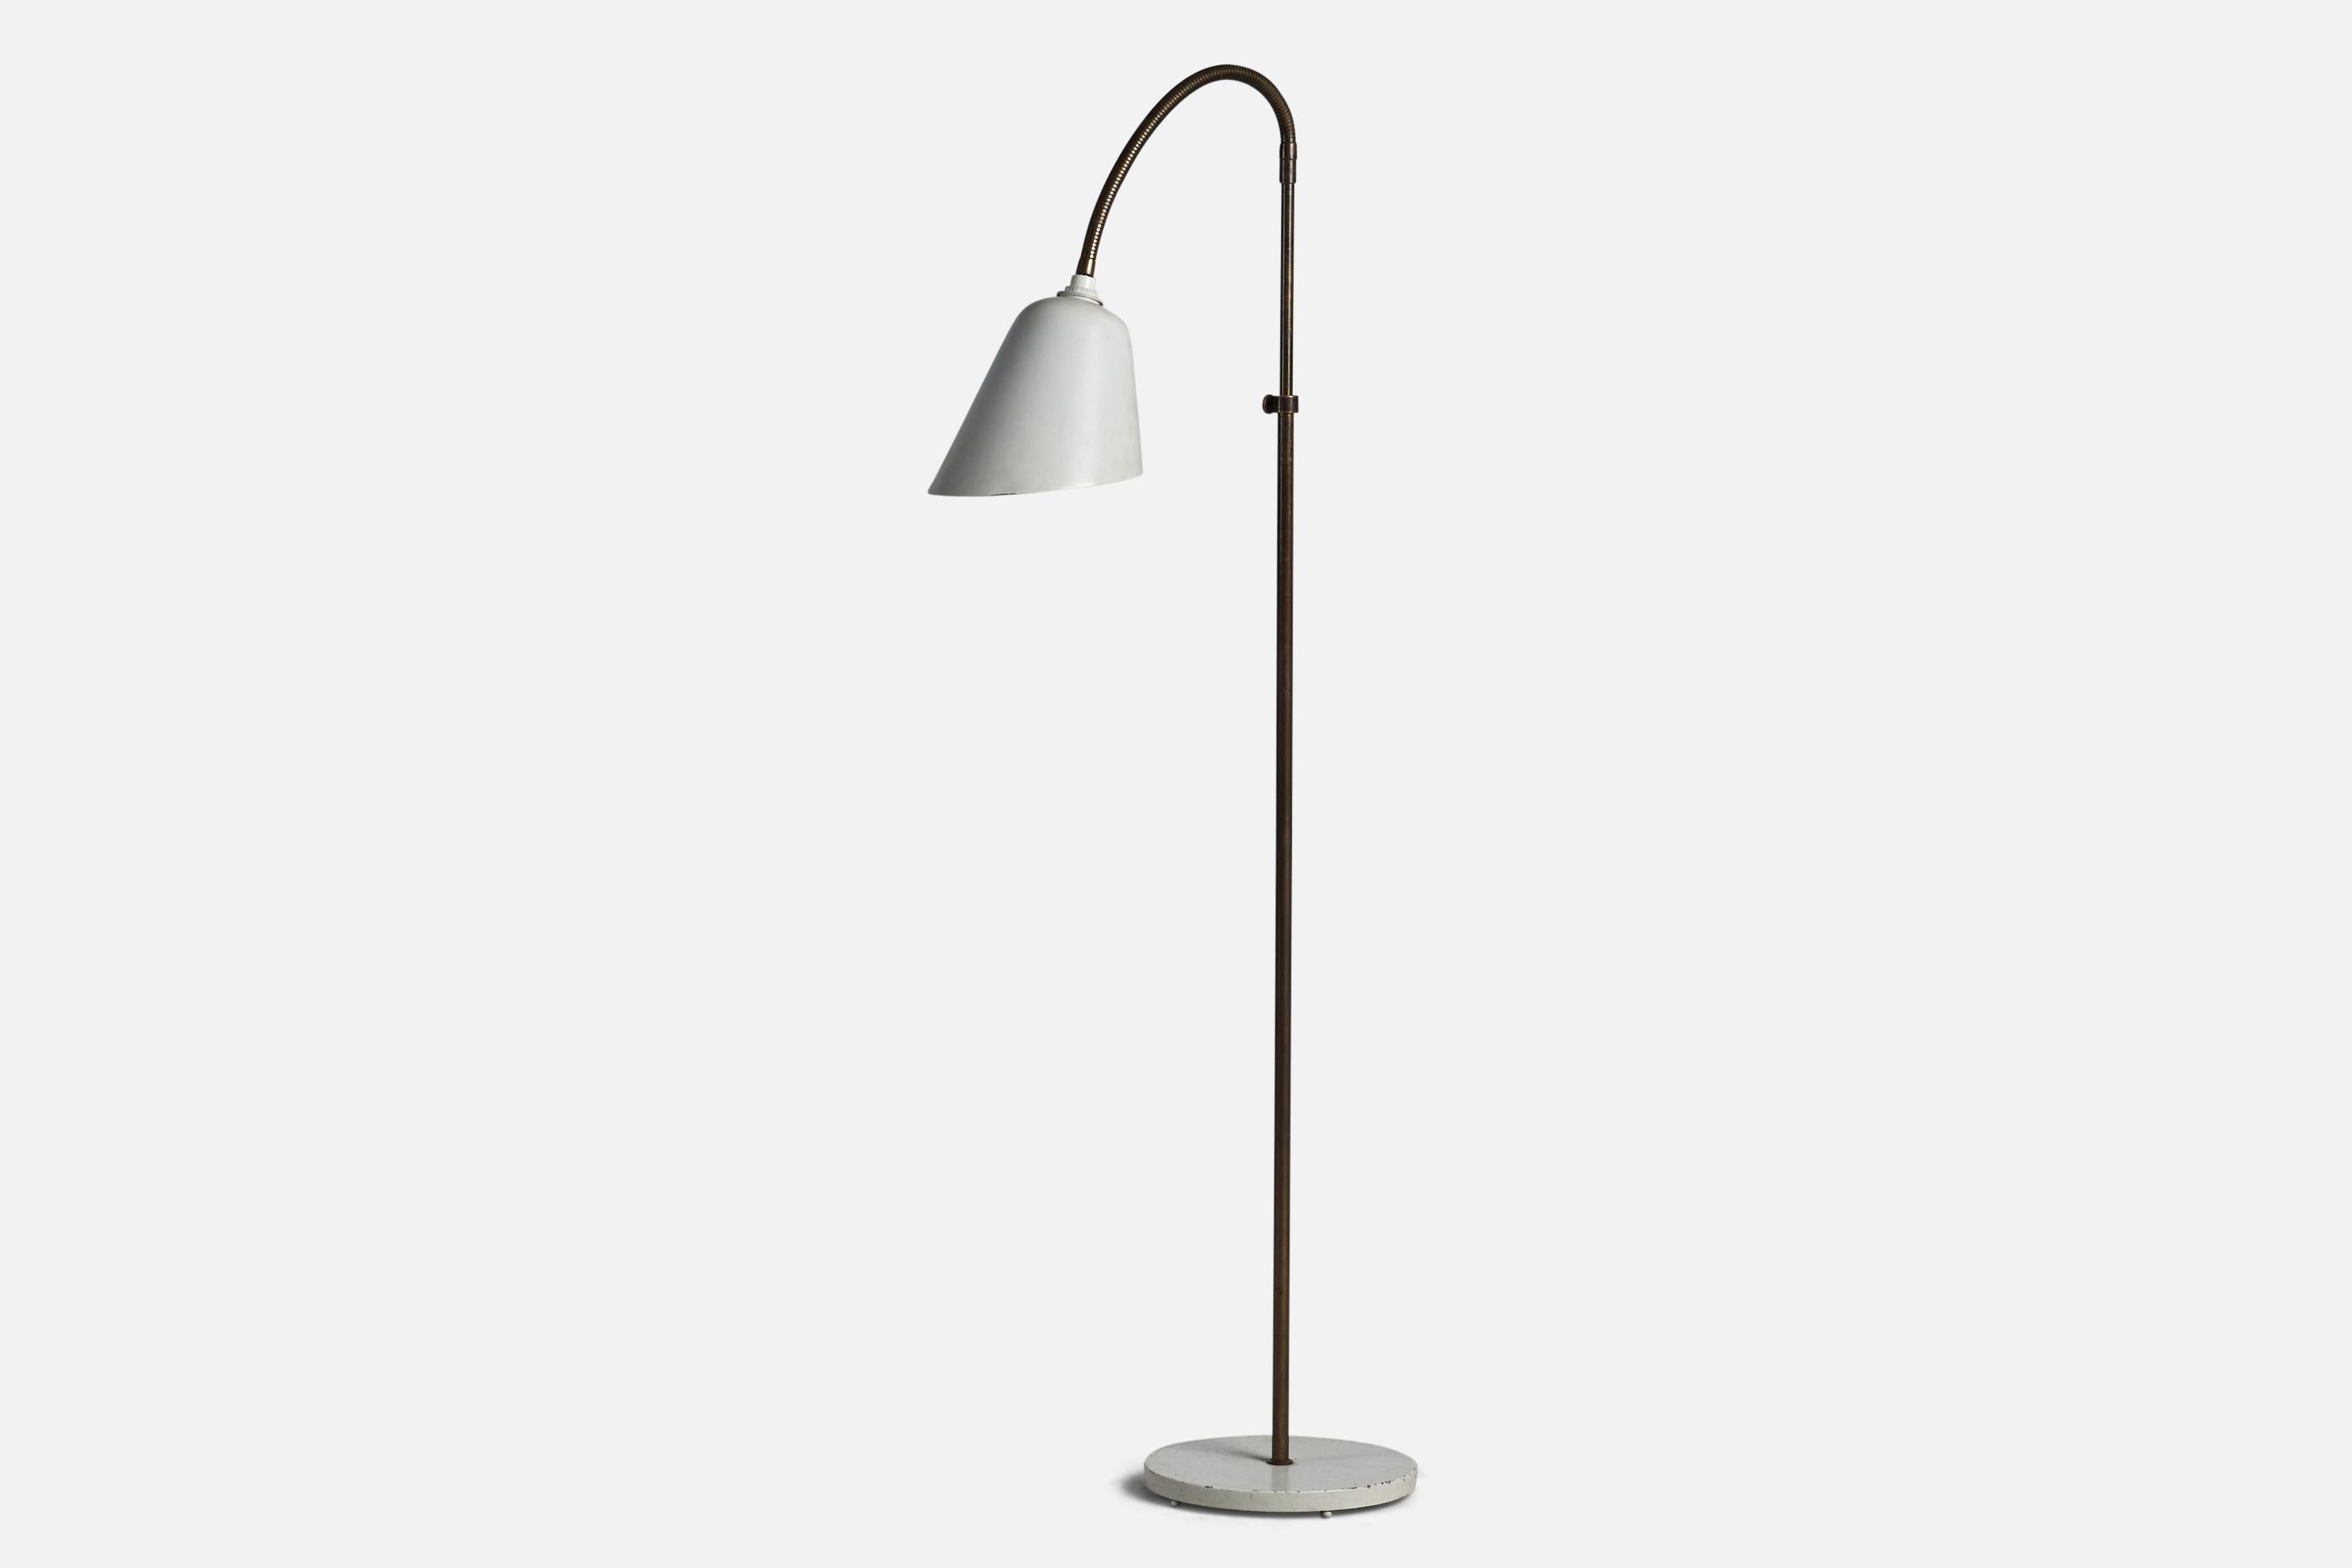 An adjustable brass and white-lacquered metal floor lamp designed by Arne Jacobsen and produced by Louis Poulsen, Denmark, c. 1930s.

Overall Dimensions (inches): 52.75” H x 7” W x 23” D
Bulb Specifications: E-14 Bulb
Number of Sockets: 1
All